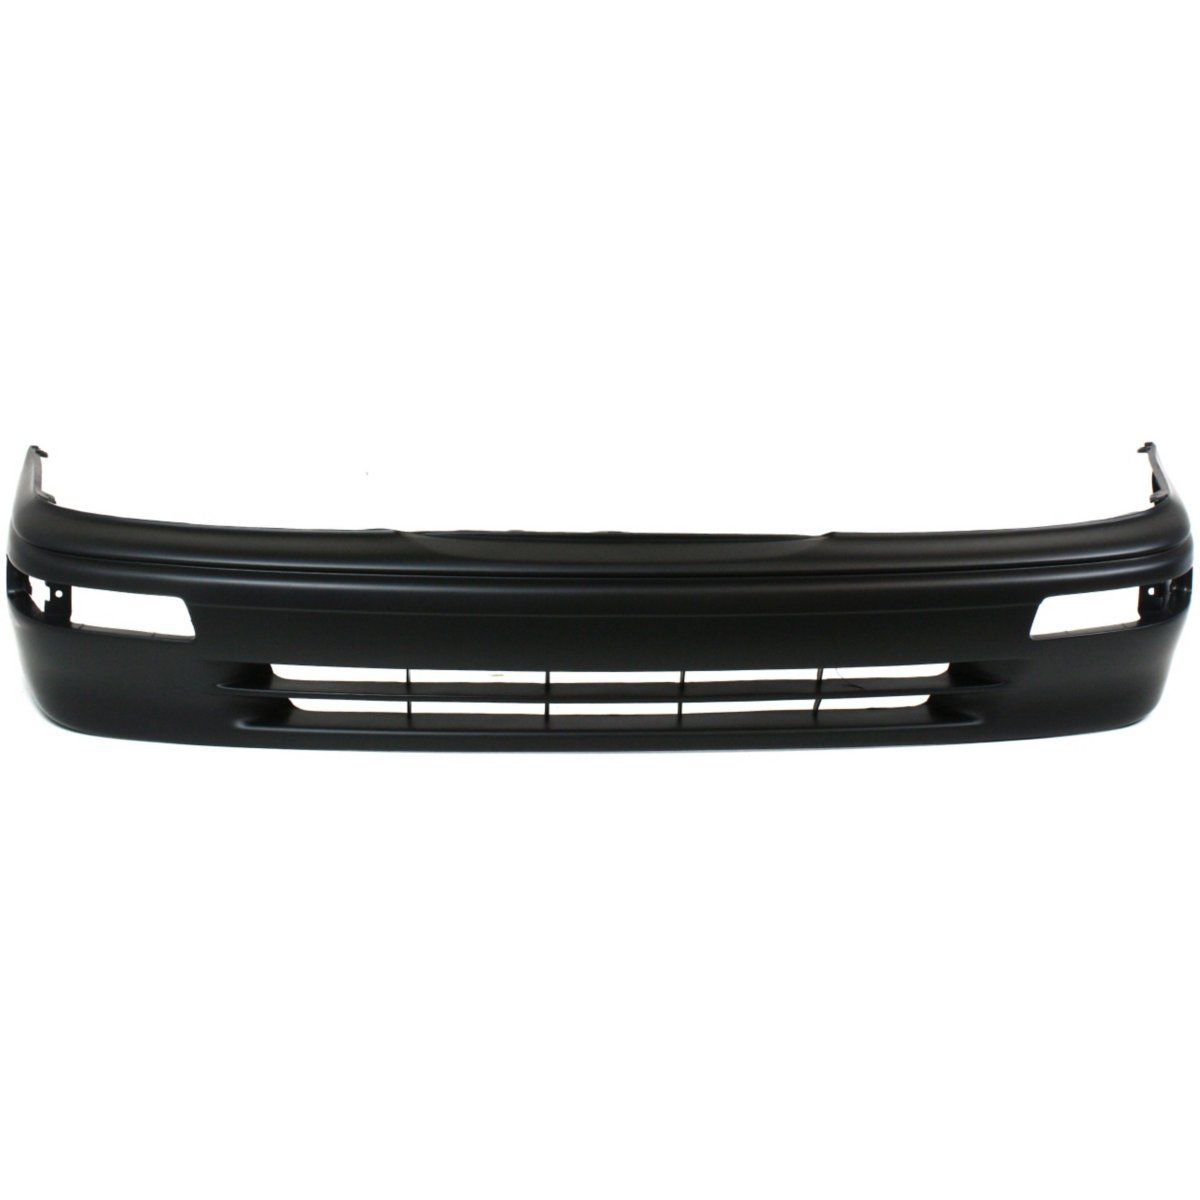 1995-1997 TOYOTA AVALON Front Bumper Cover USA Painted to Match